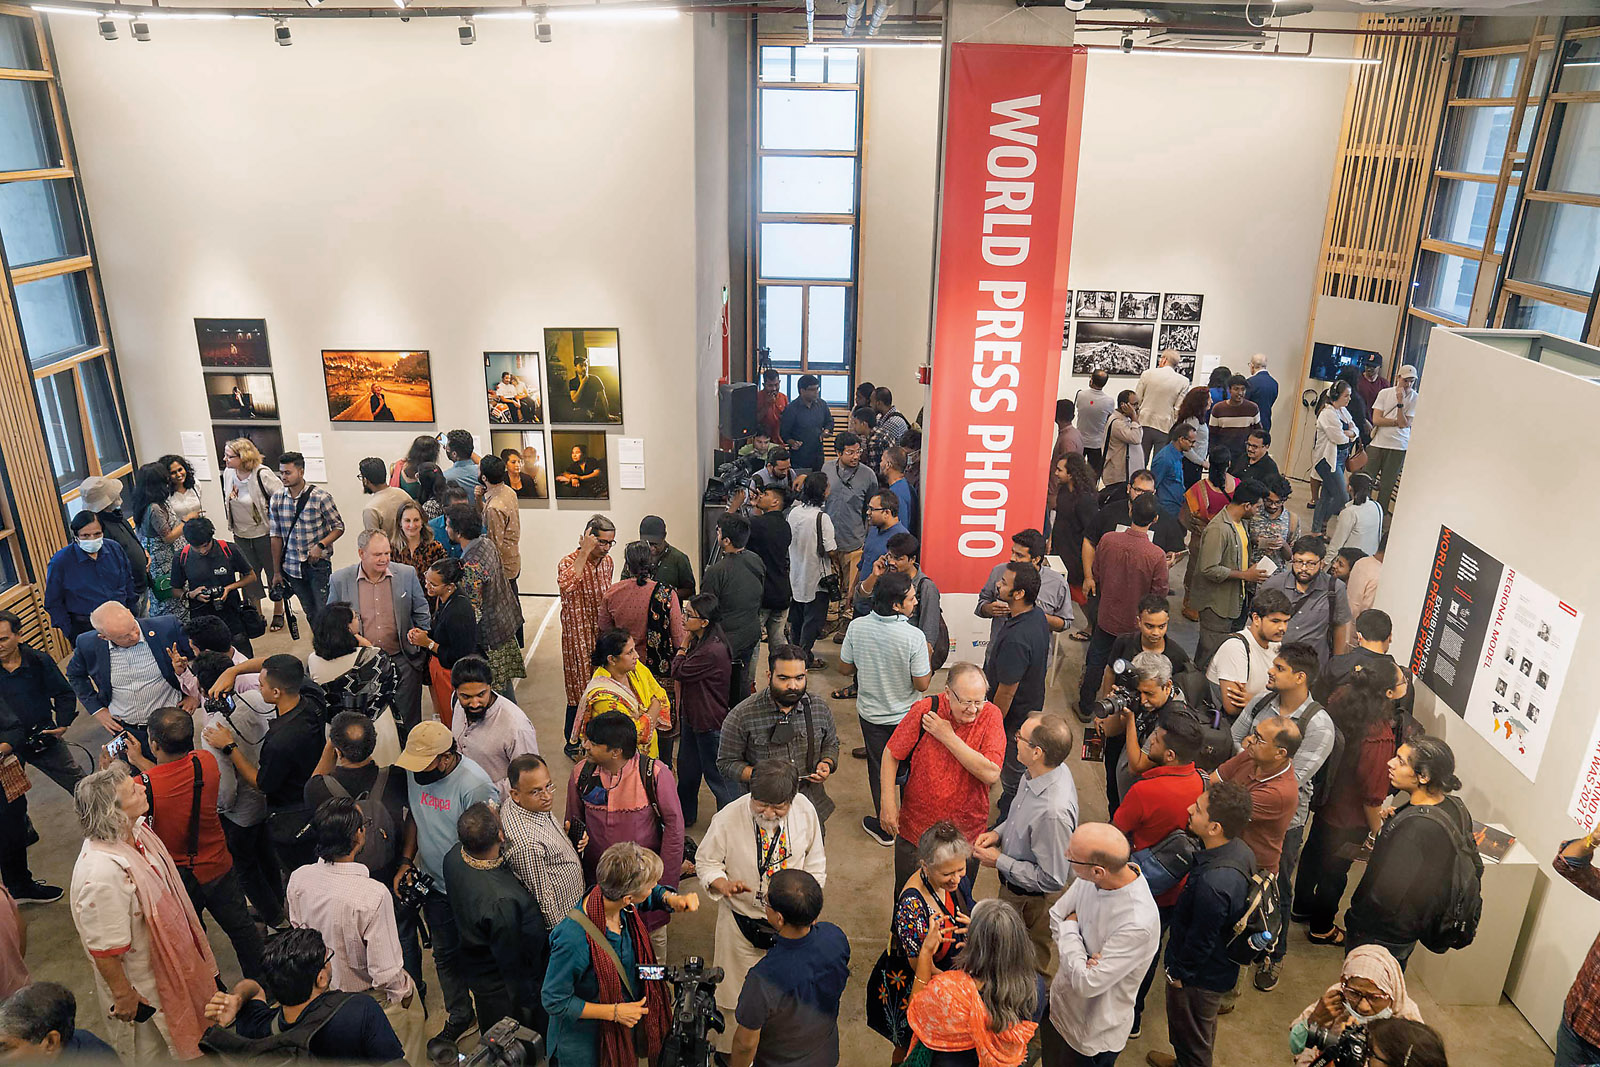 The opening of the World Press Photo Exhibition 2022 on November 4 at the Drik Gallery in Dhaka, Bangladesh, highlighted one of the Amsterdam-based photogra- phy foundation’s six new regional partnerships.